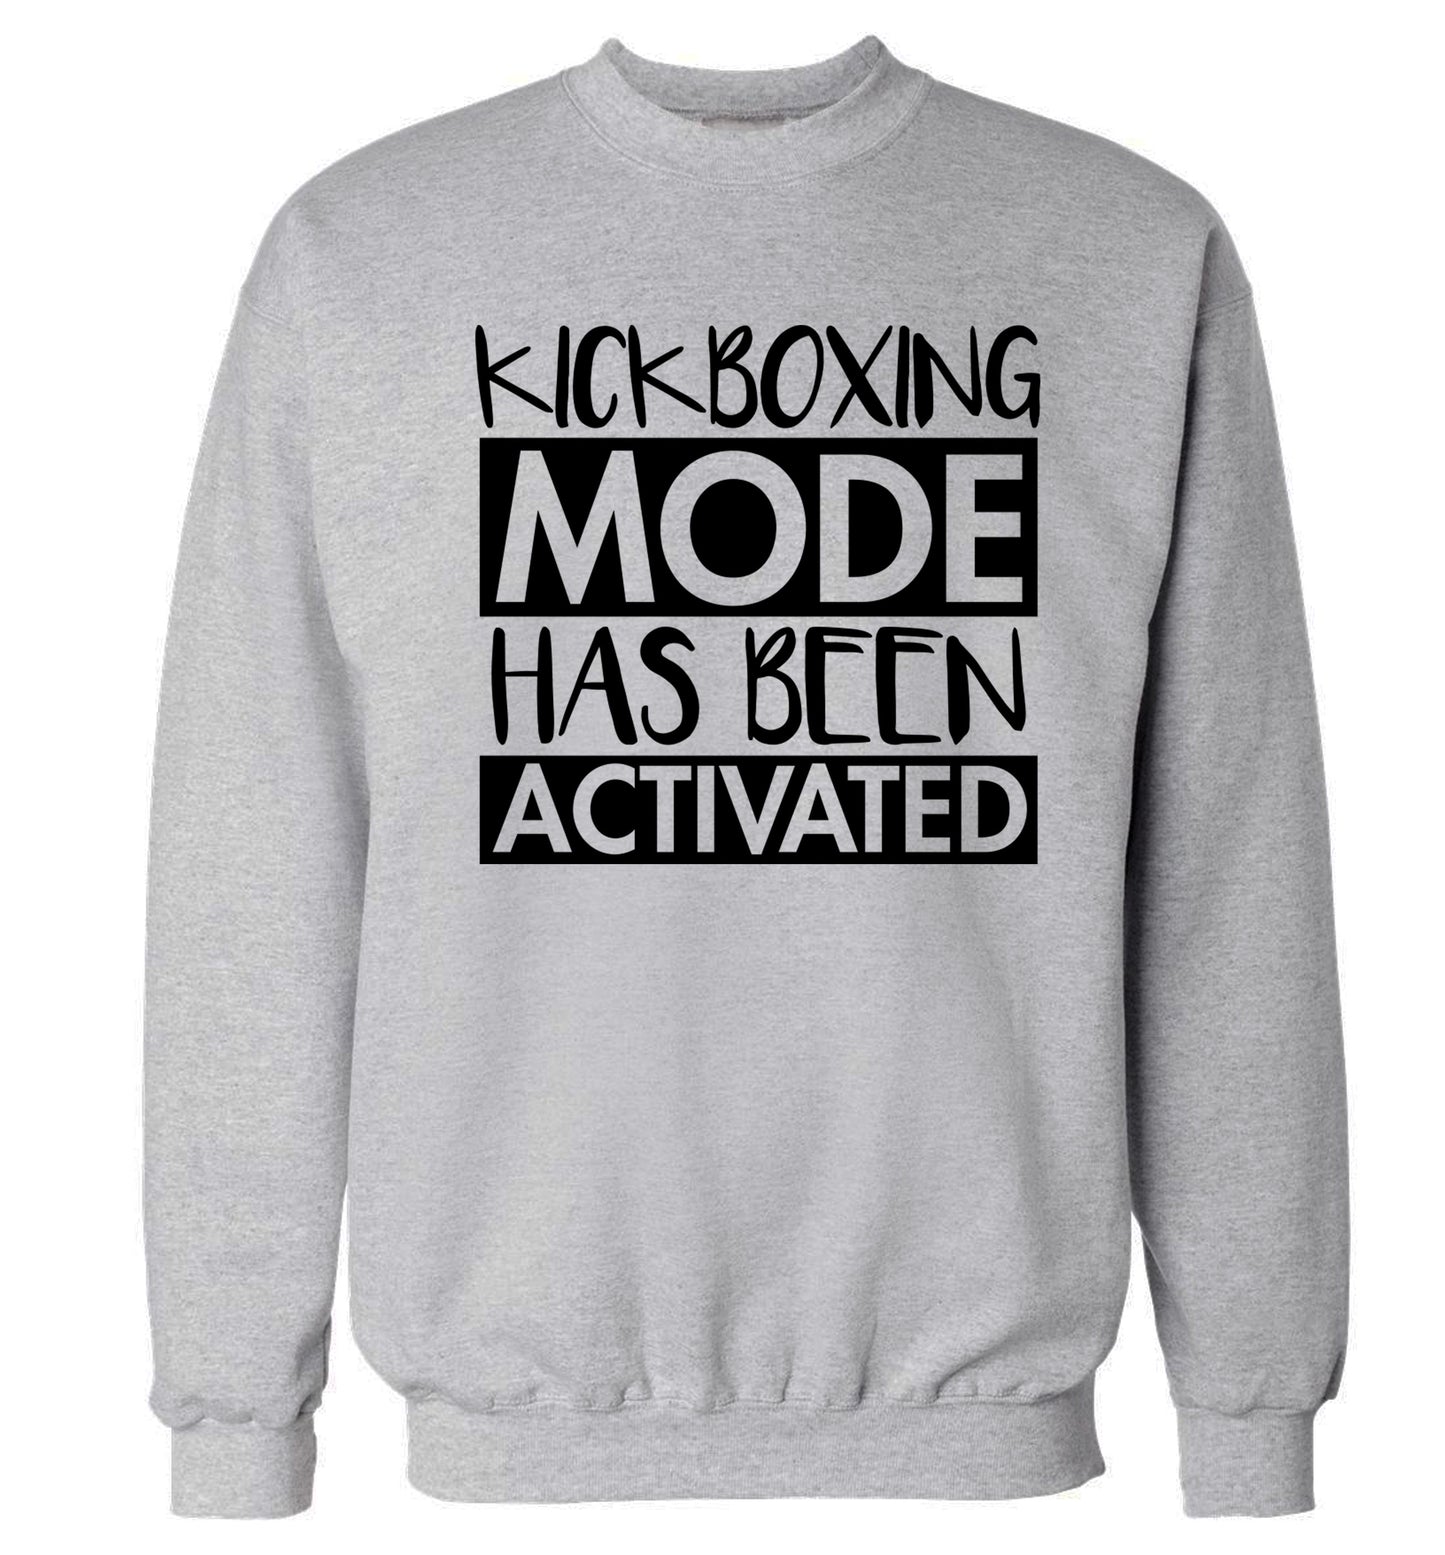 Kickboxing mode activated Adult's unisex grey Sweater 2XL